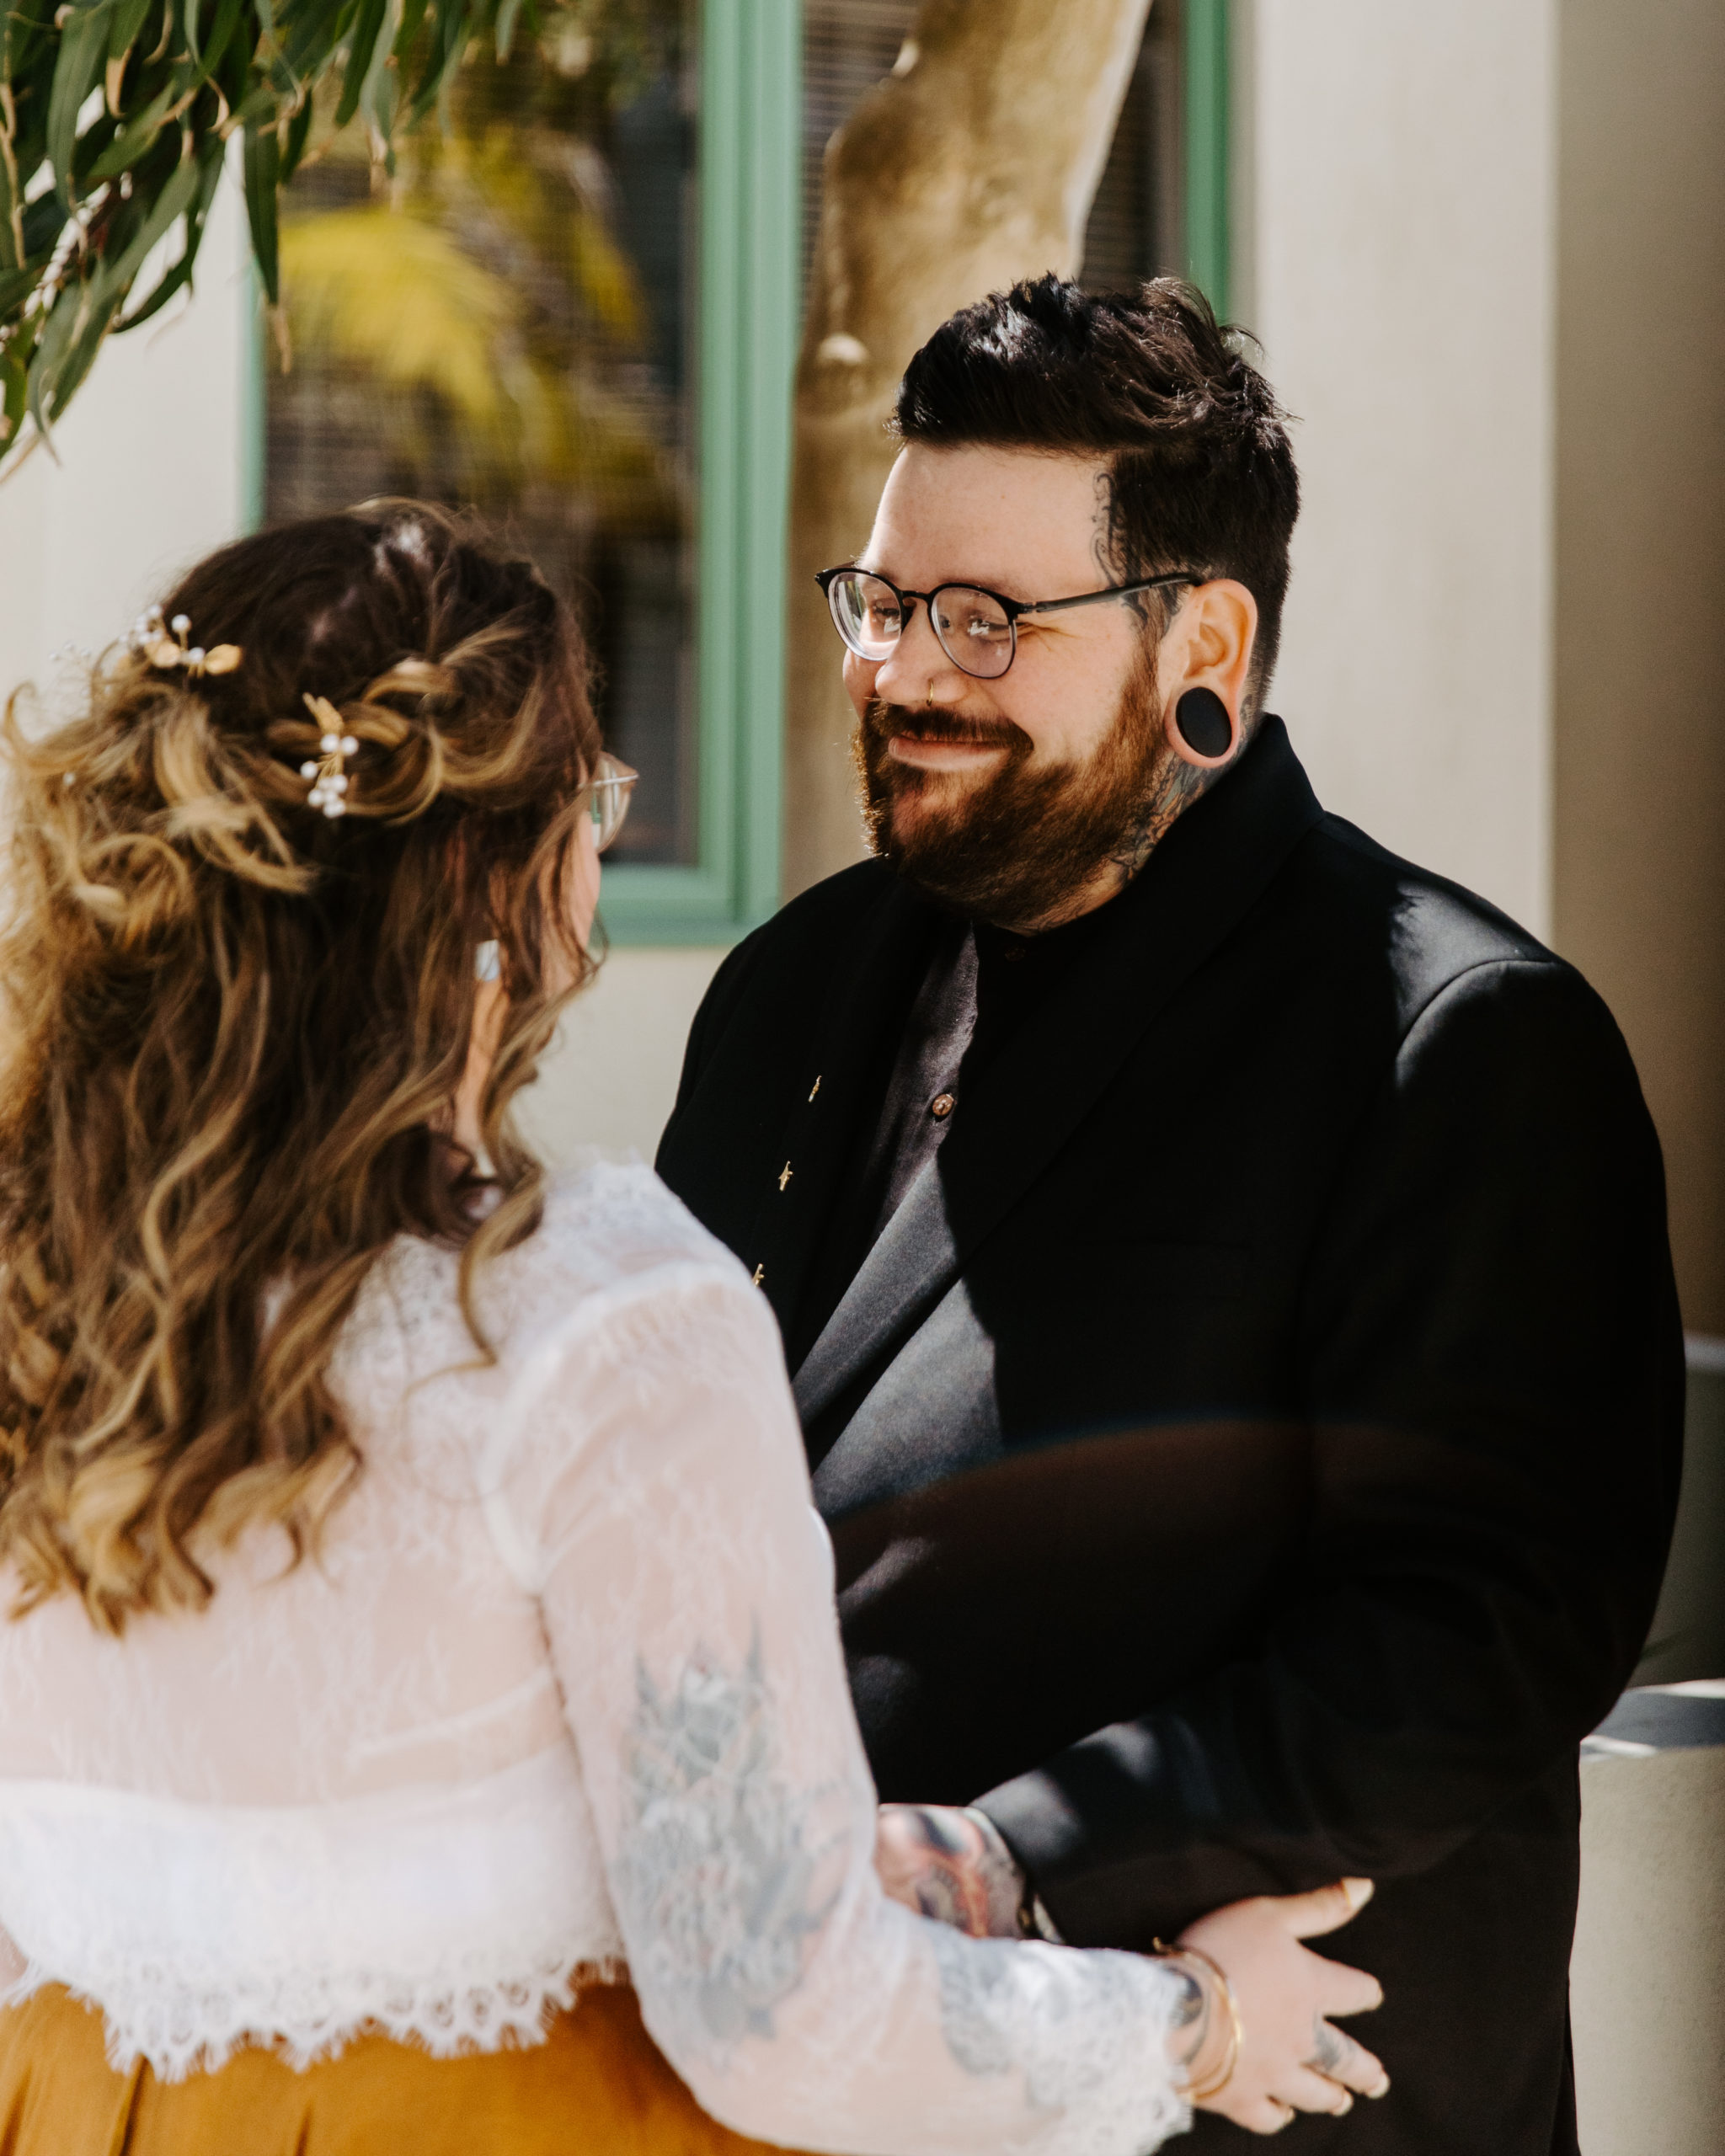 A happy couple at their wedding in San Diego California. The groom is in a black tux and the bride is in a white lace dress with orange skirt. Both are smiling, it is a sunny day. 